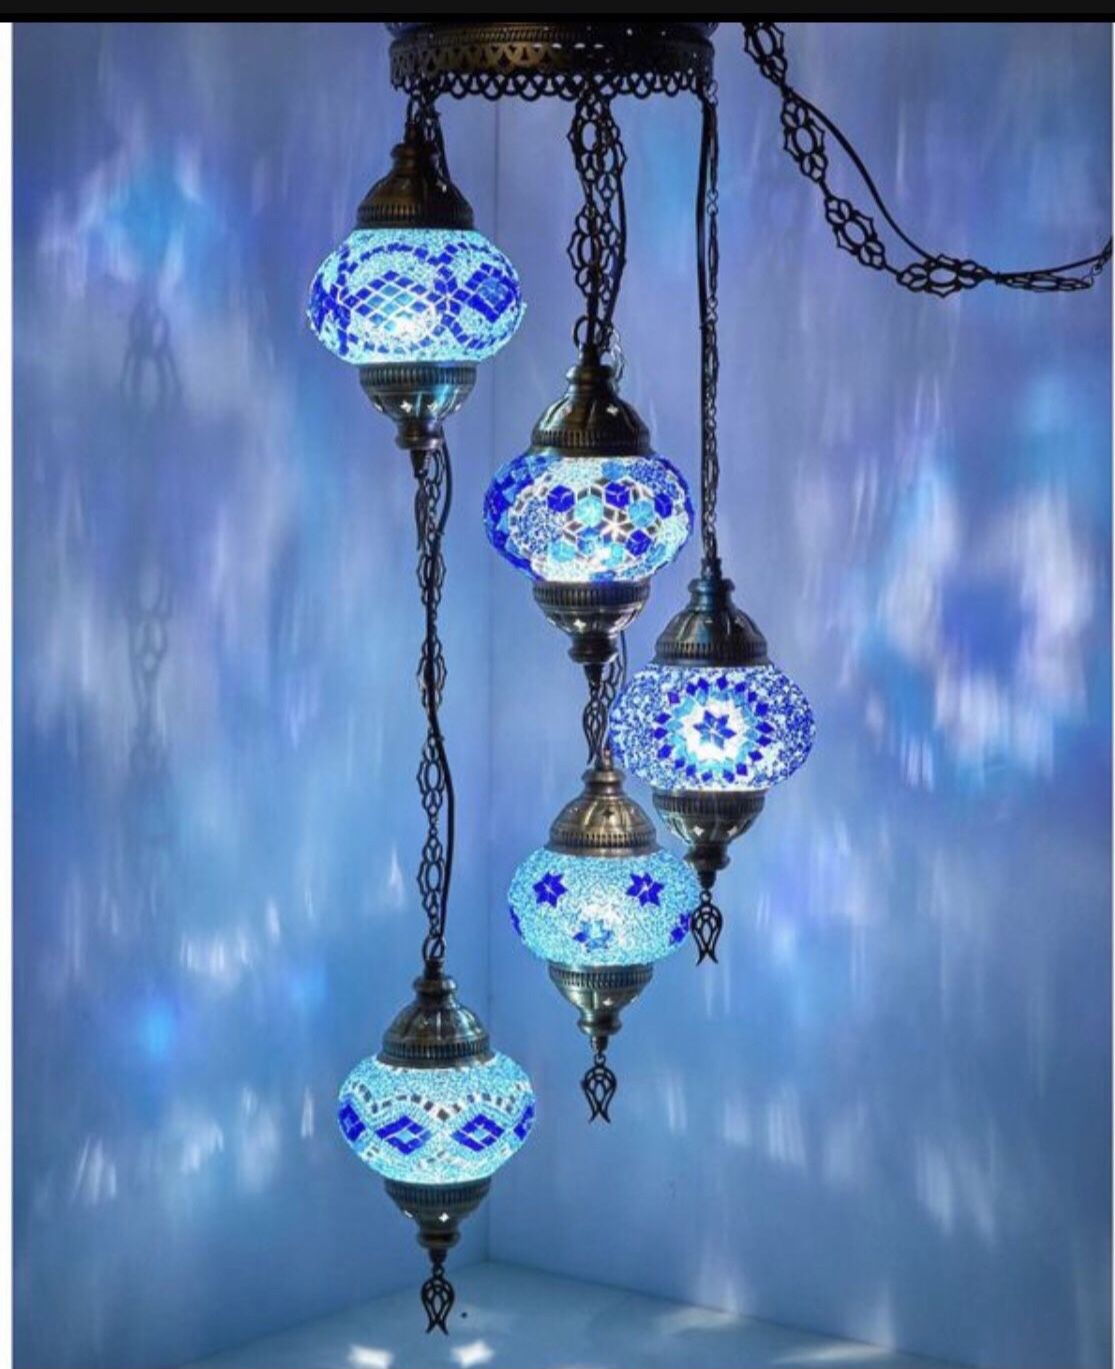 Handmade Hanging Lamps From Turkey 